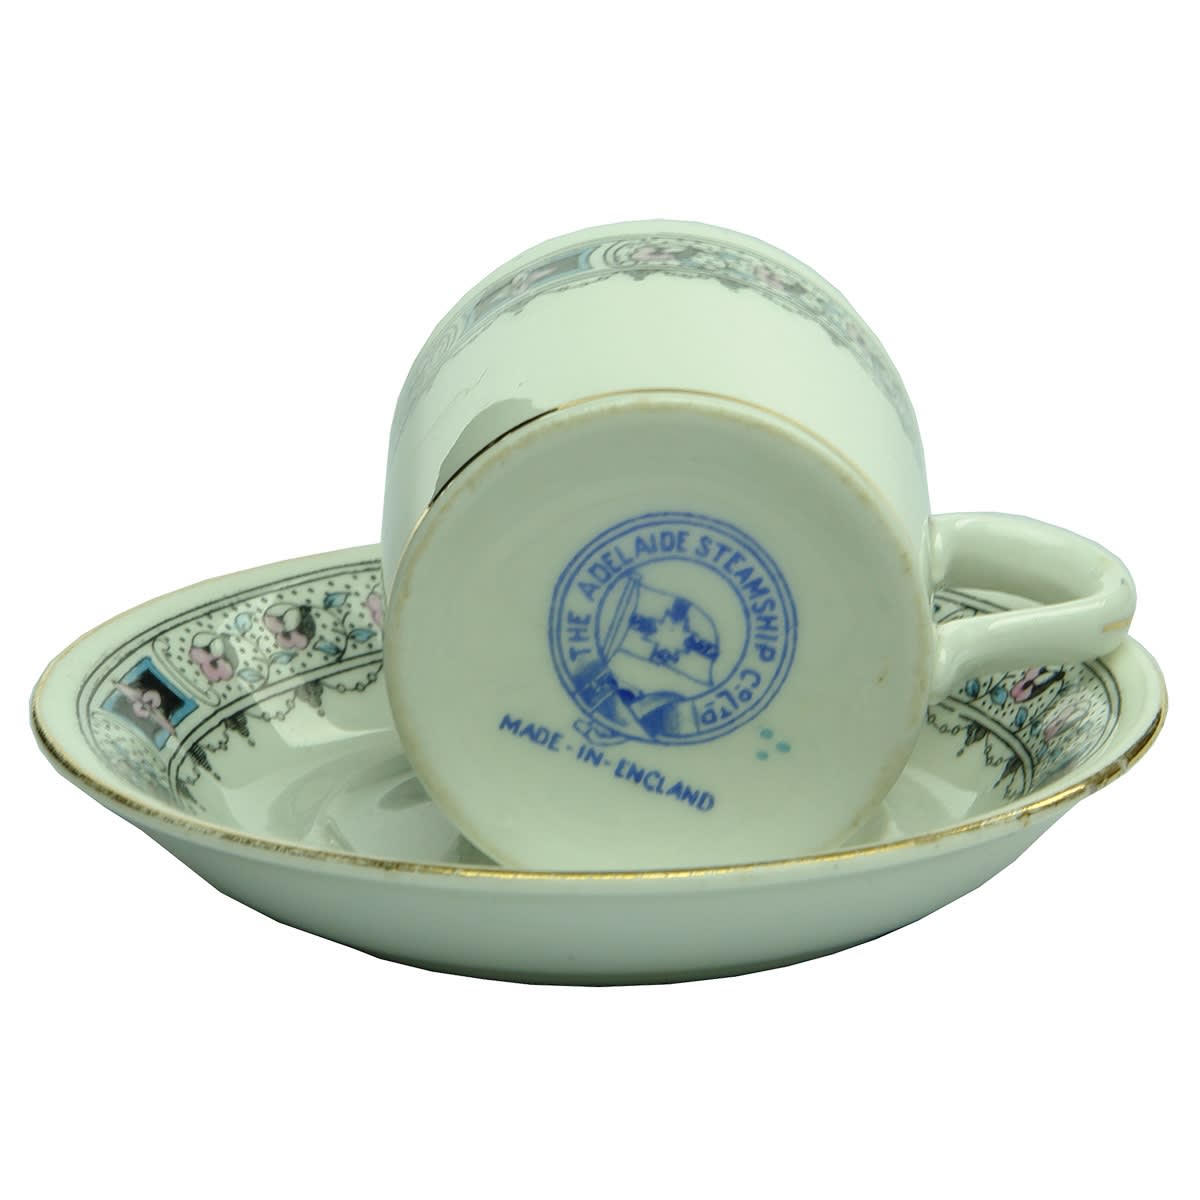 Hotelware. The Adelaide Steamship Co Ltd Cup and Saucer. (South Australia)